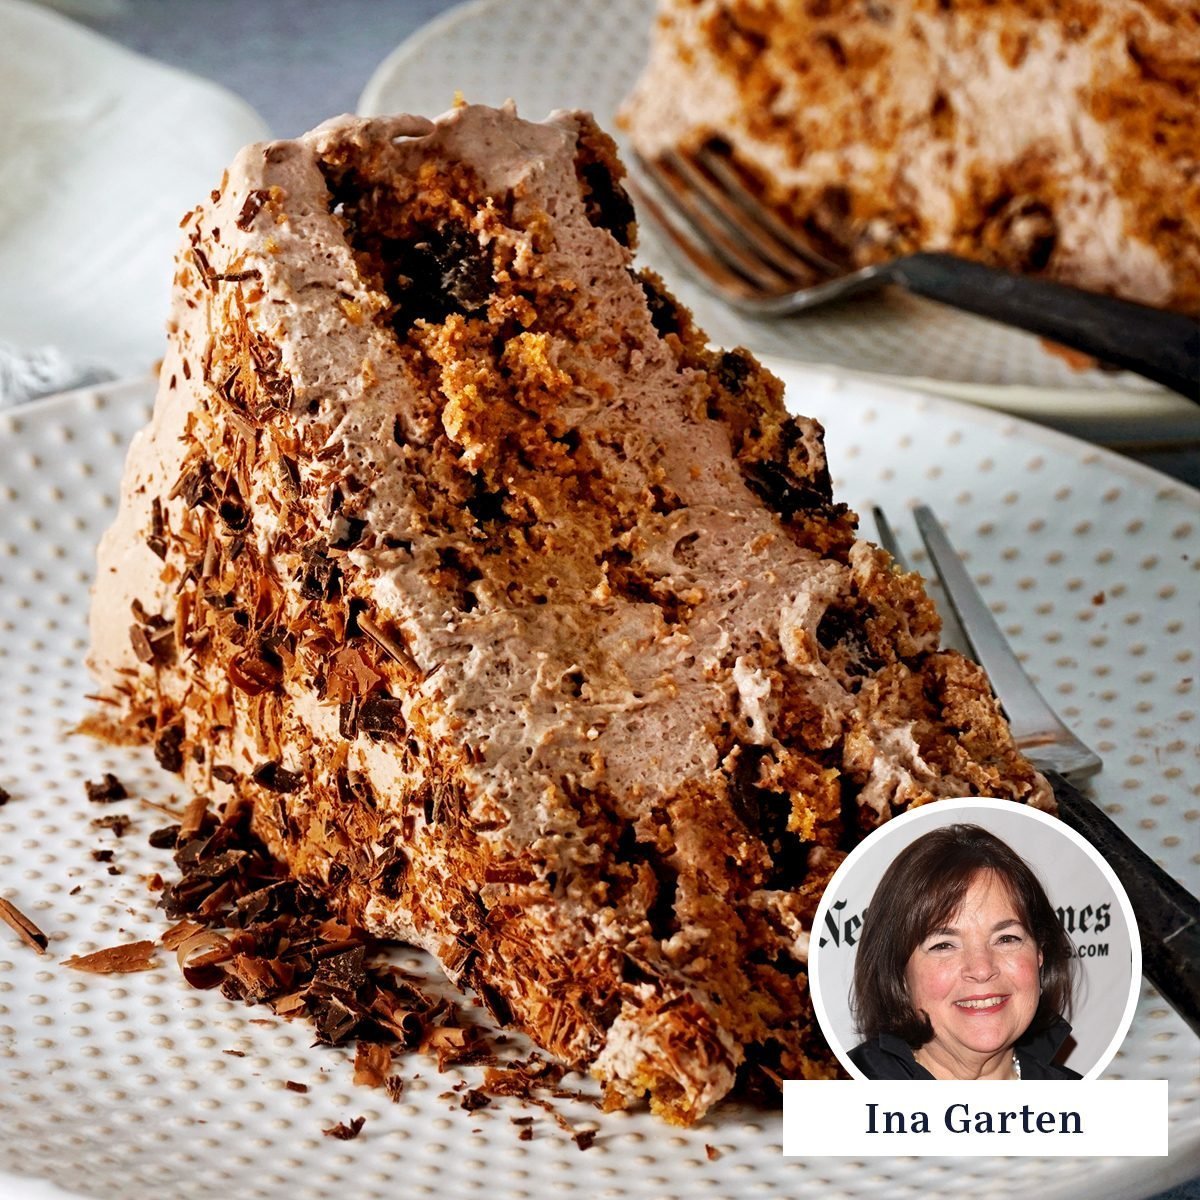 Ina Garten's Icebox Cake Will Keep You Cool This Summer